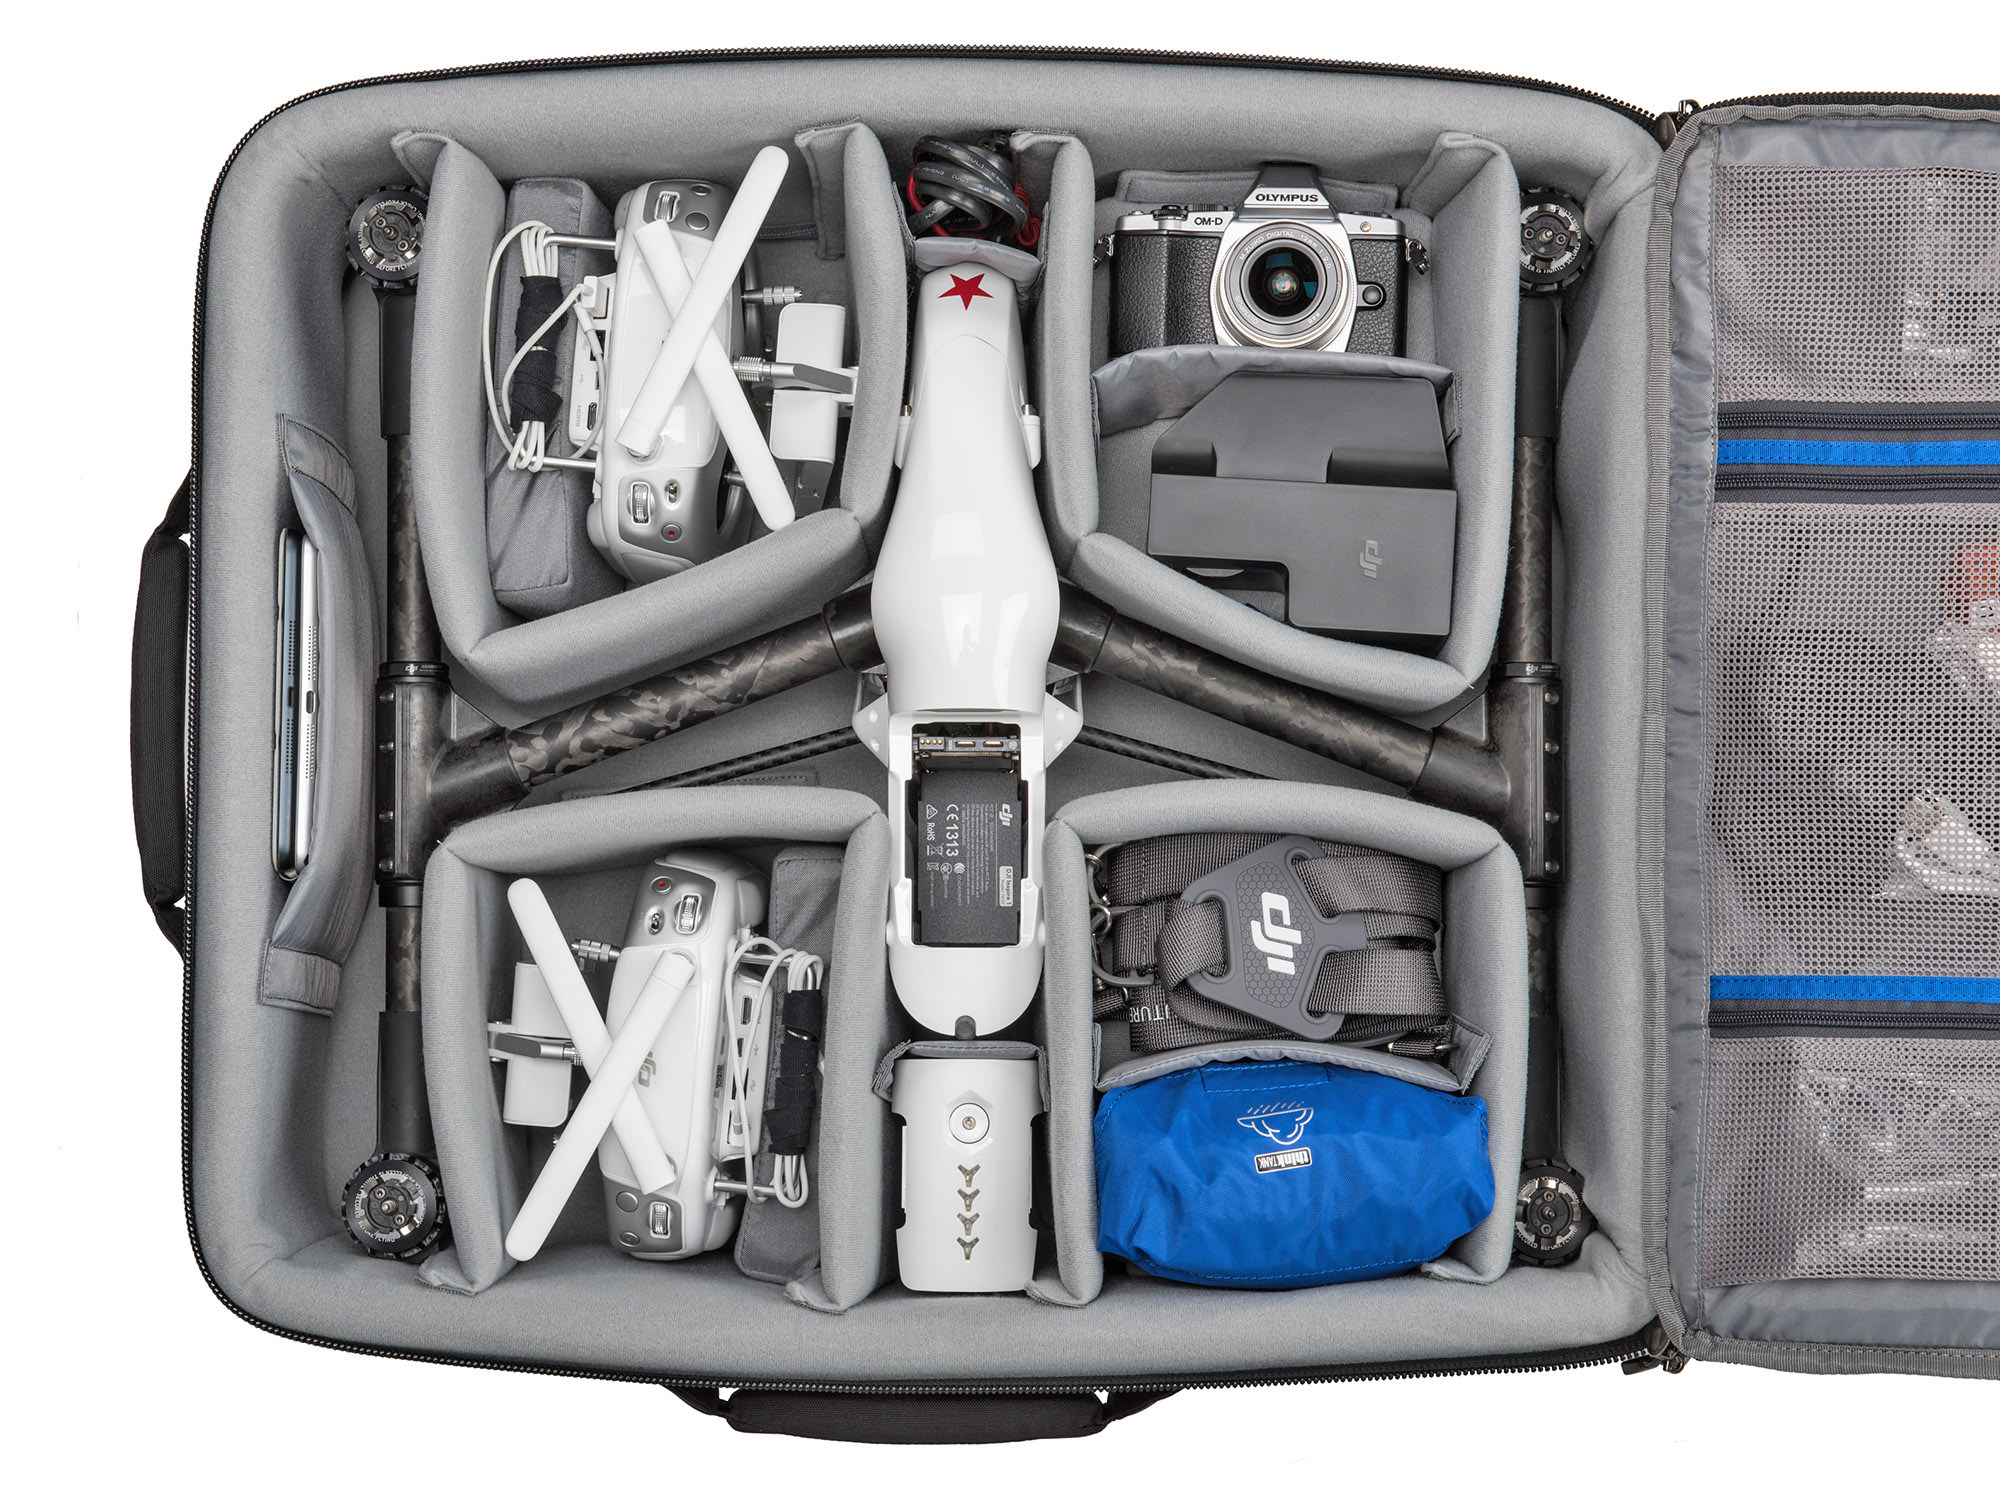 Buy Kraptick EVA Hard Case Travel Carry Case Storage Bag for DJI Tello Drone  and Accessories Batteries Box (Black) Online at Low Prices in India -  Amazon.in